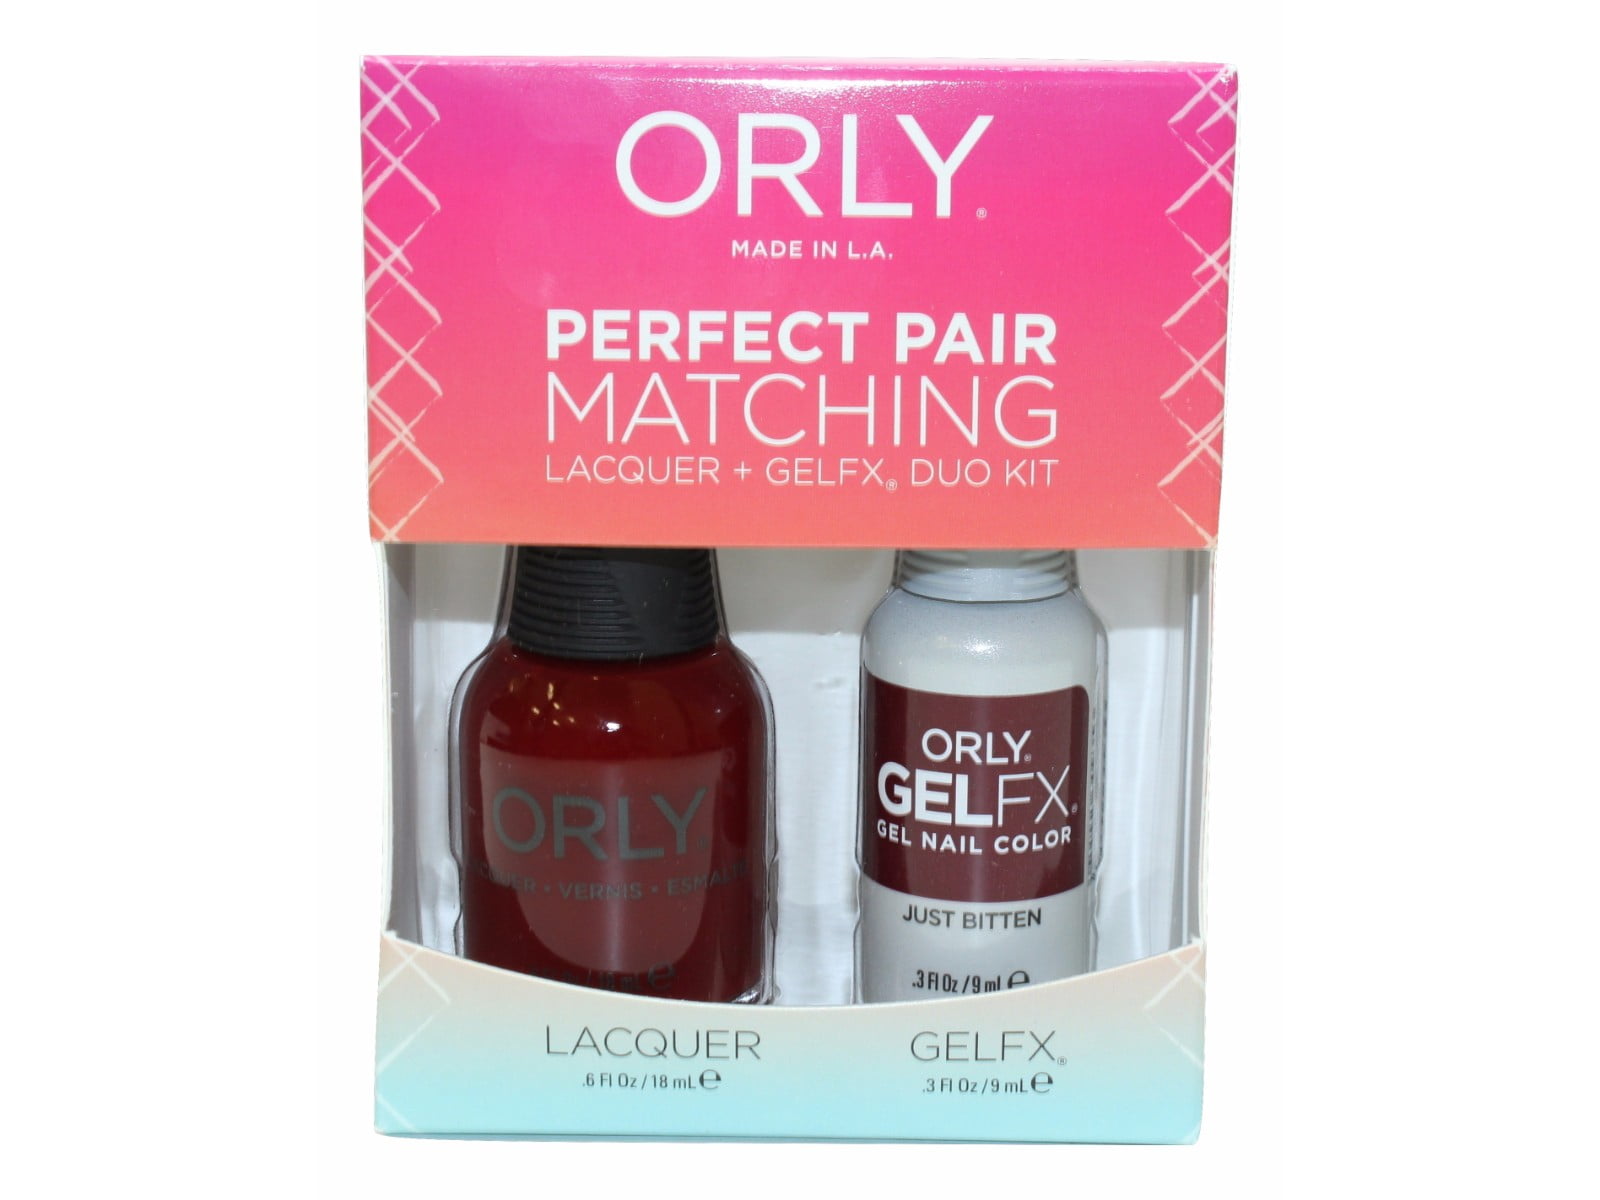 Orly Nail Lacquer in Kiss the Bride - wide 8